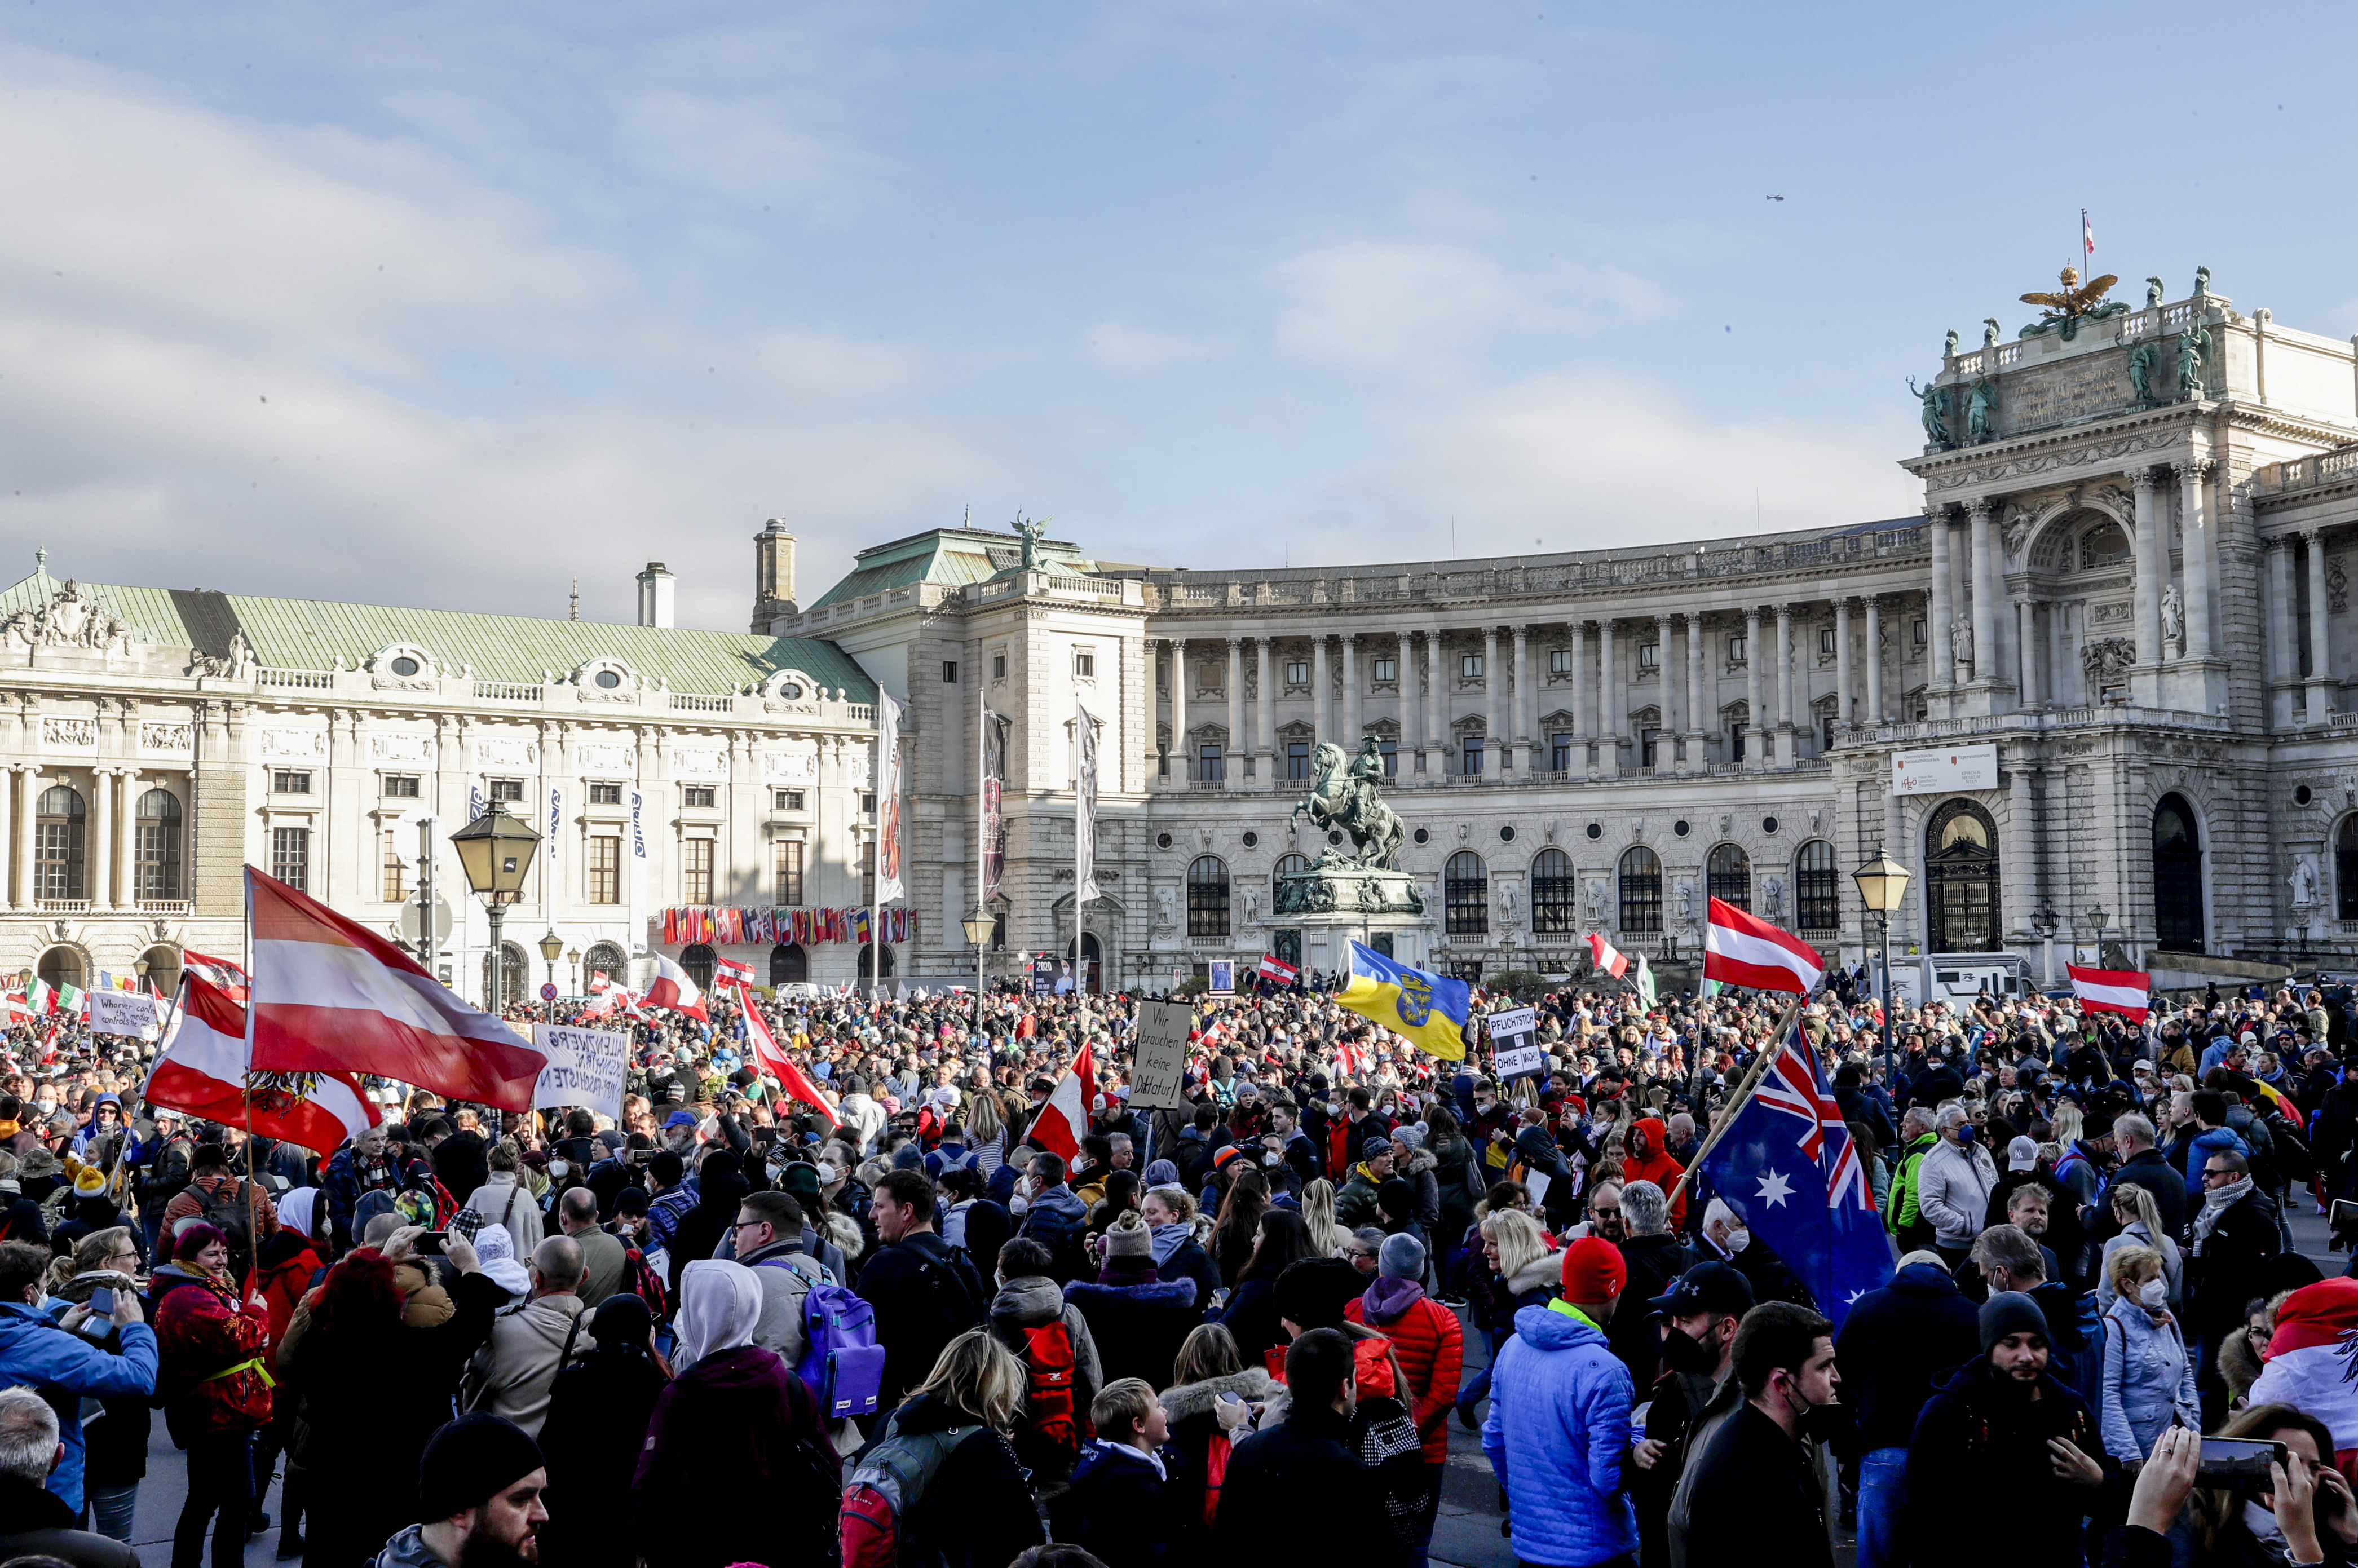 People take part in a demonstration against the country's coronavirus restrictions in Vienna, Austria